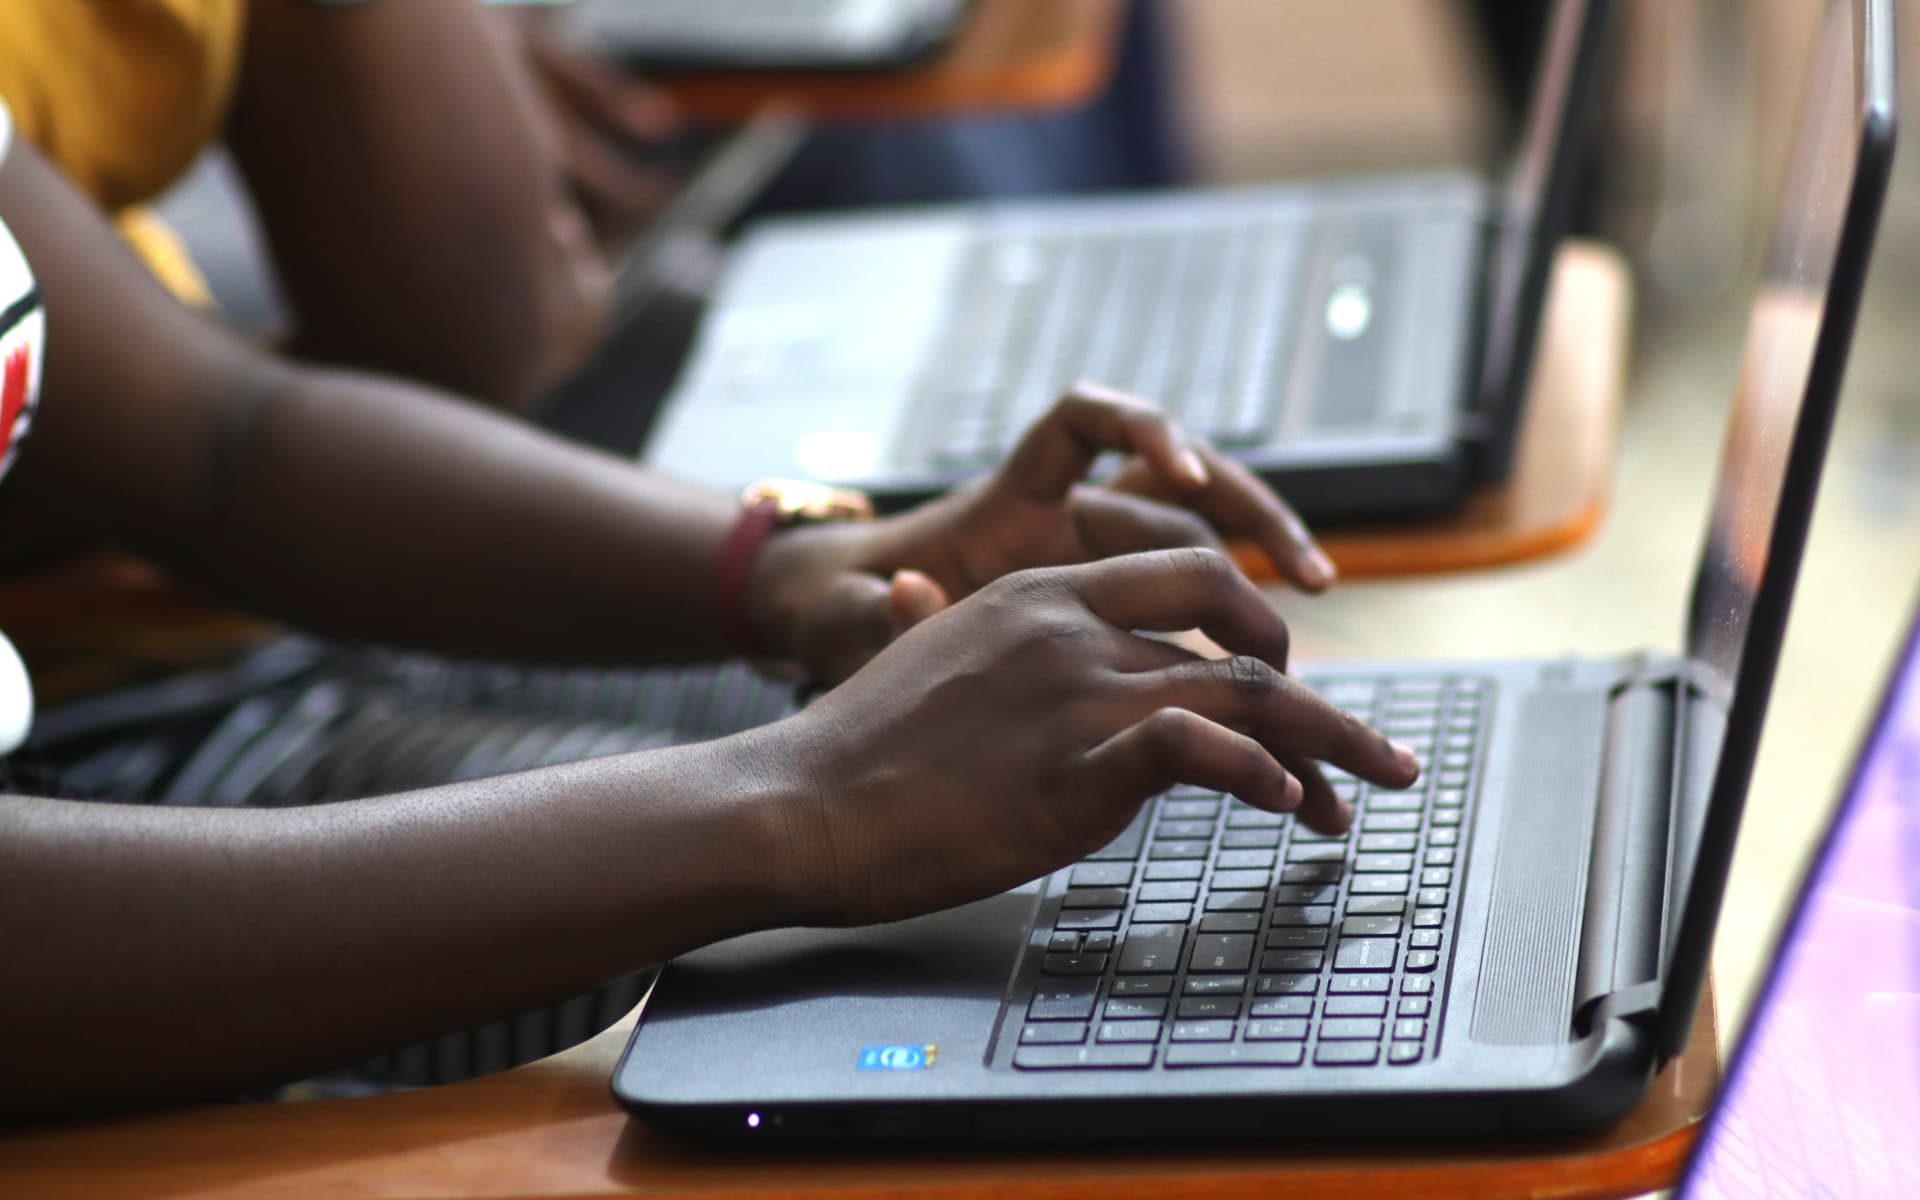 ACT-US: Combating Digital Illiteracy in Africa so Children Can Succeed